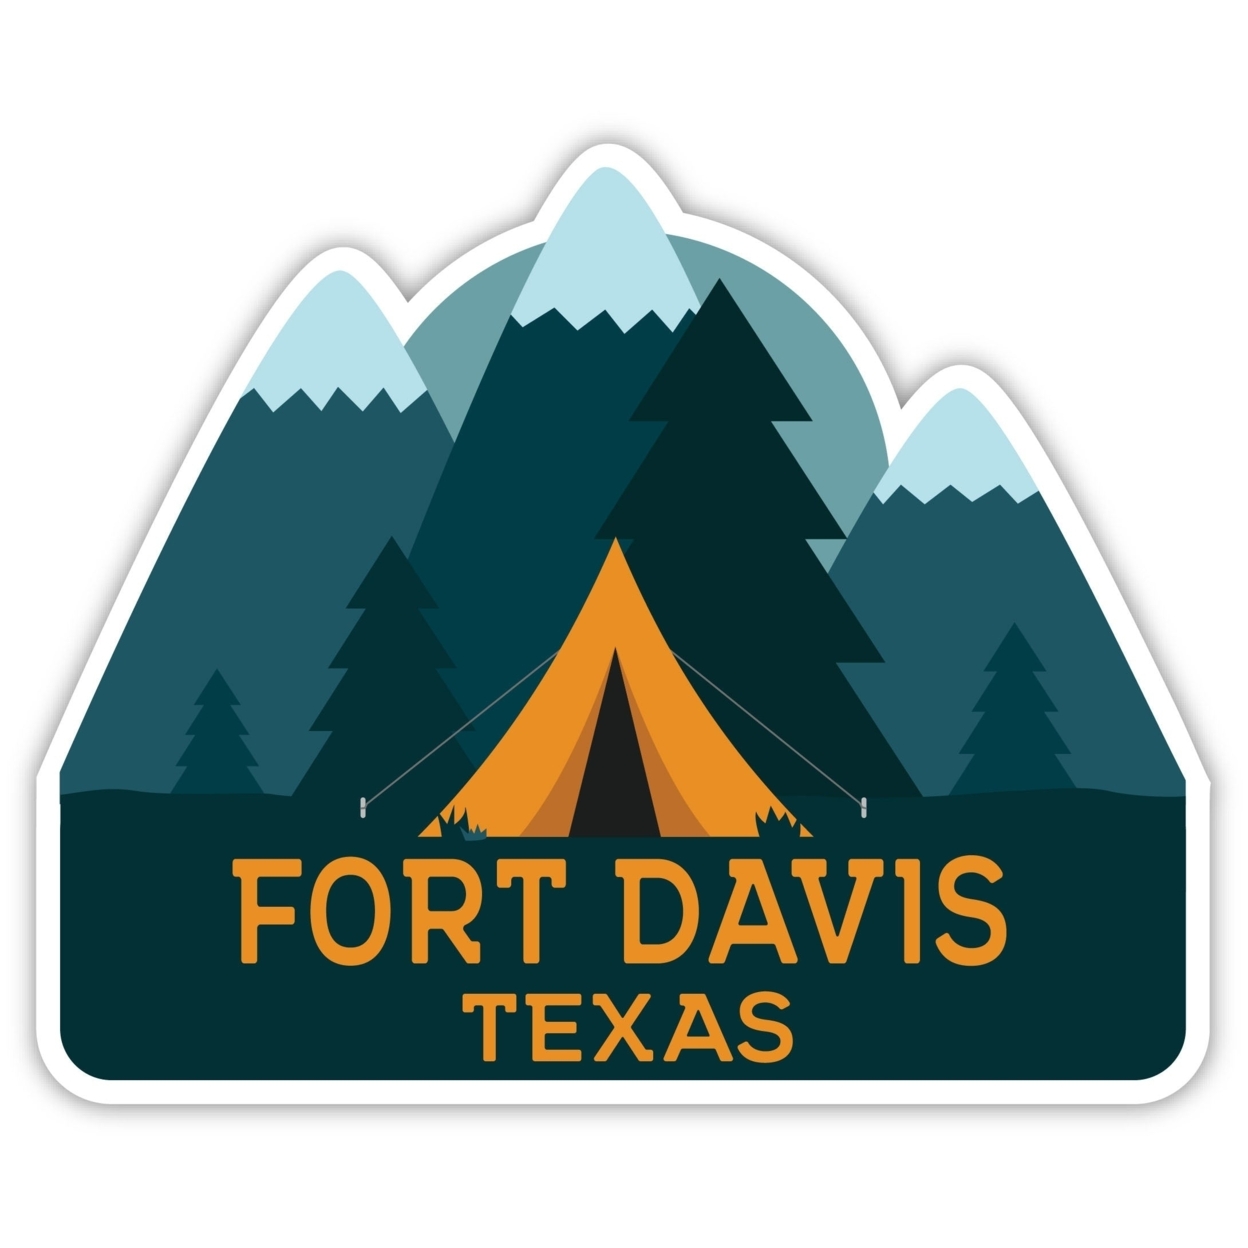 Fort Davis Texas Souvenir Decorative Stickers (Choose Theme And Size) - Single Unit, 12-Inch, Great Outdoors